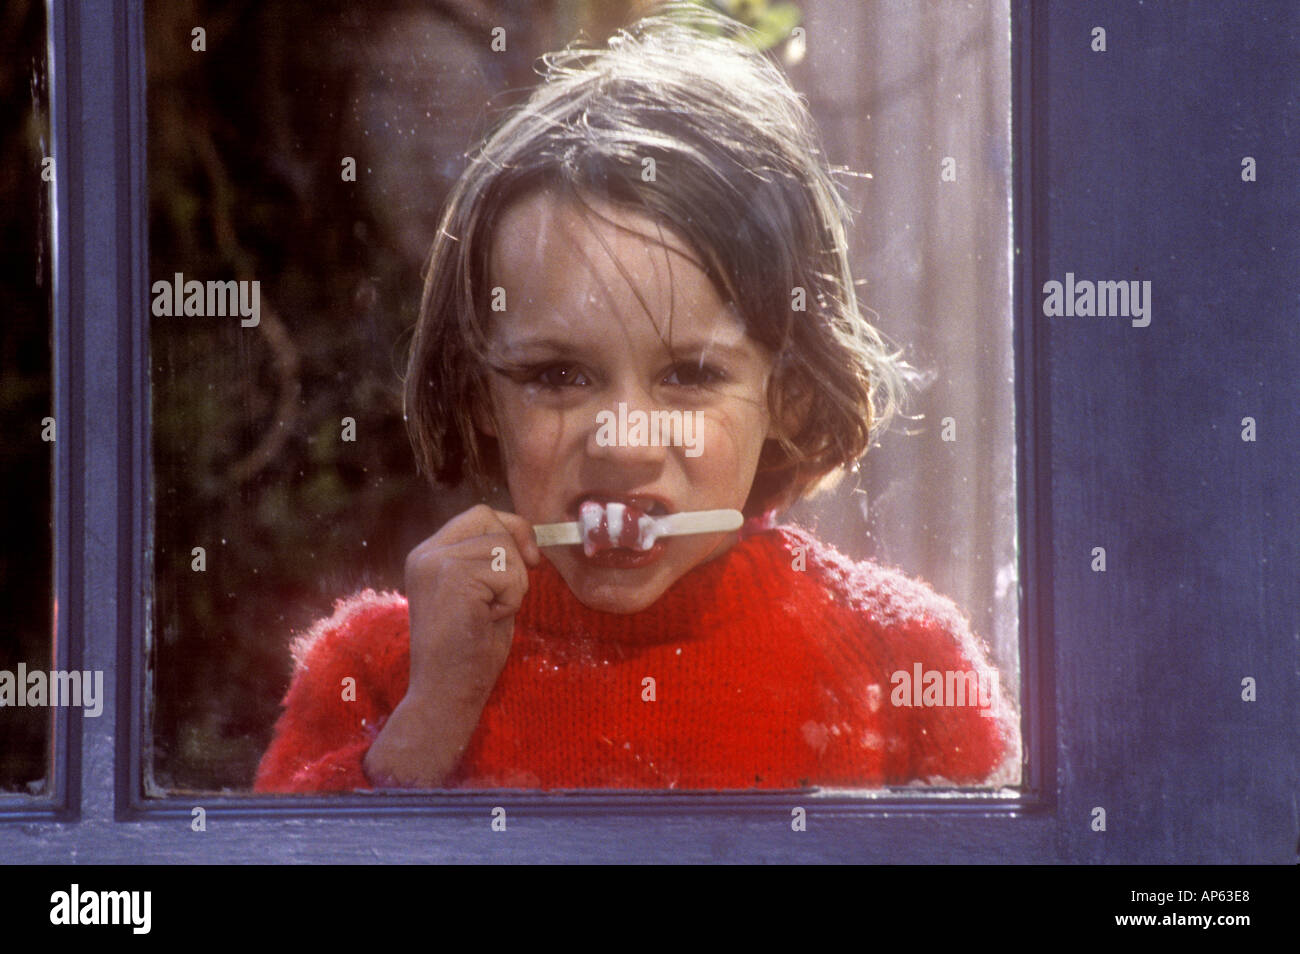 sweet portrait of young child in red jumper looking through window and eating ice lolly Stock Photo